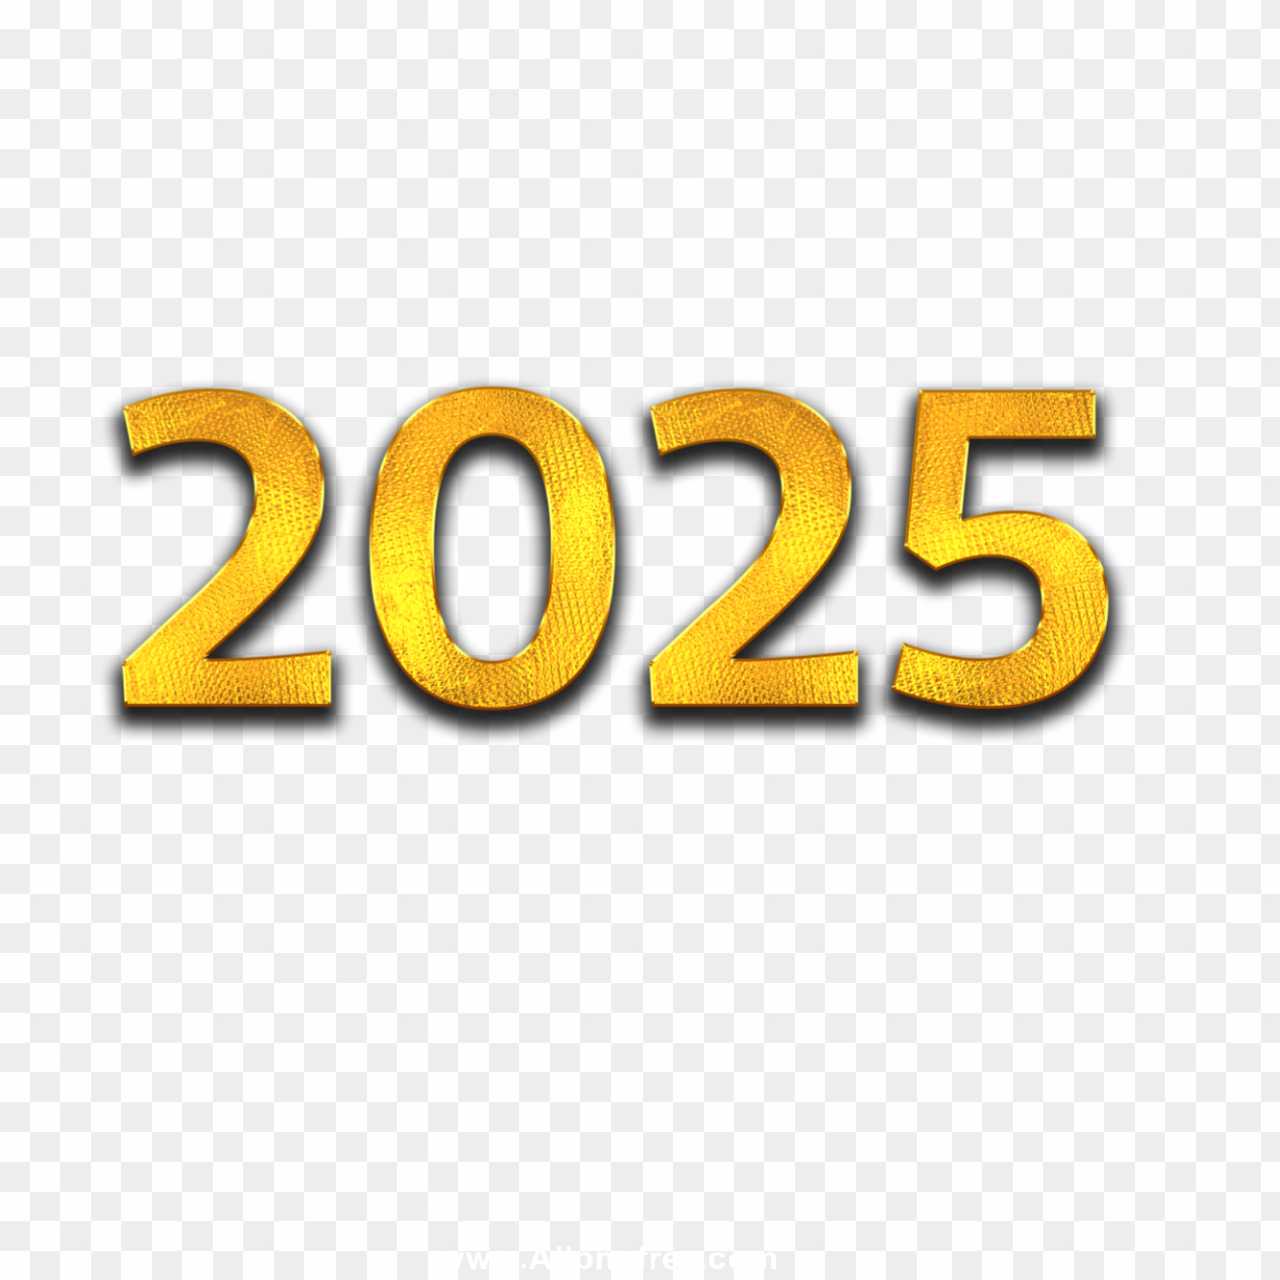 Happy New Year 2025 banner editing text PNG images download 